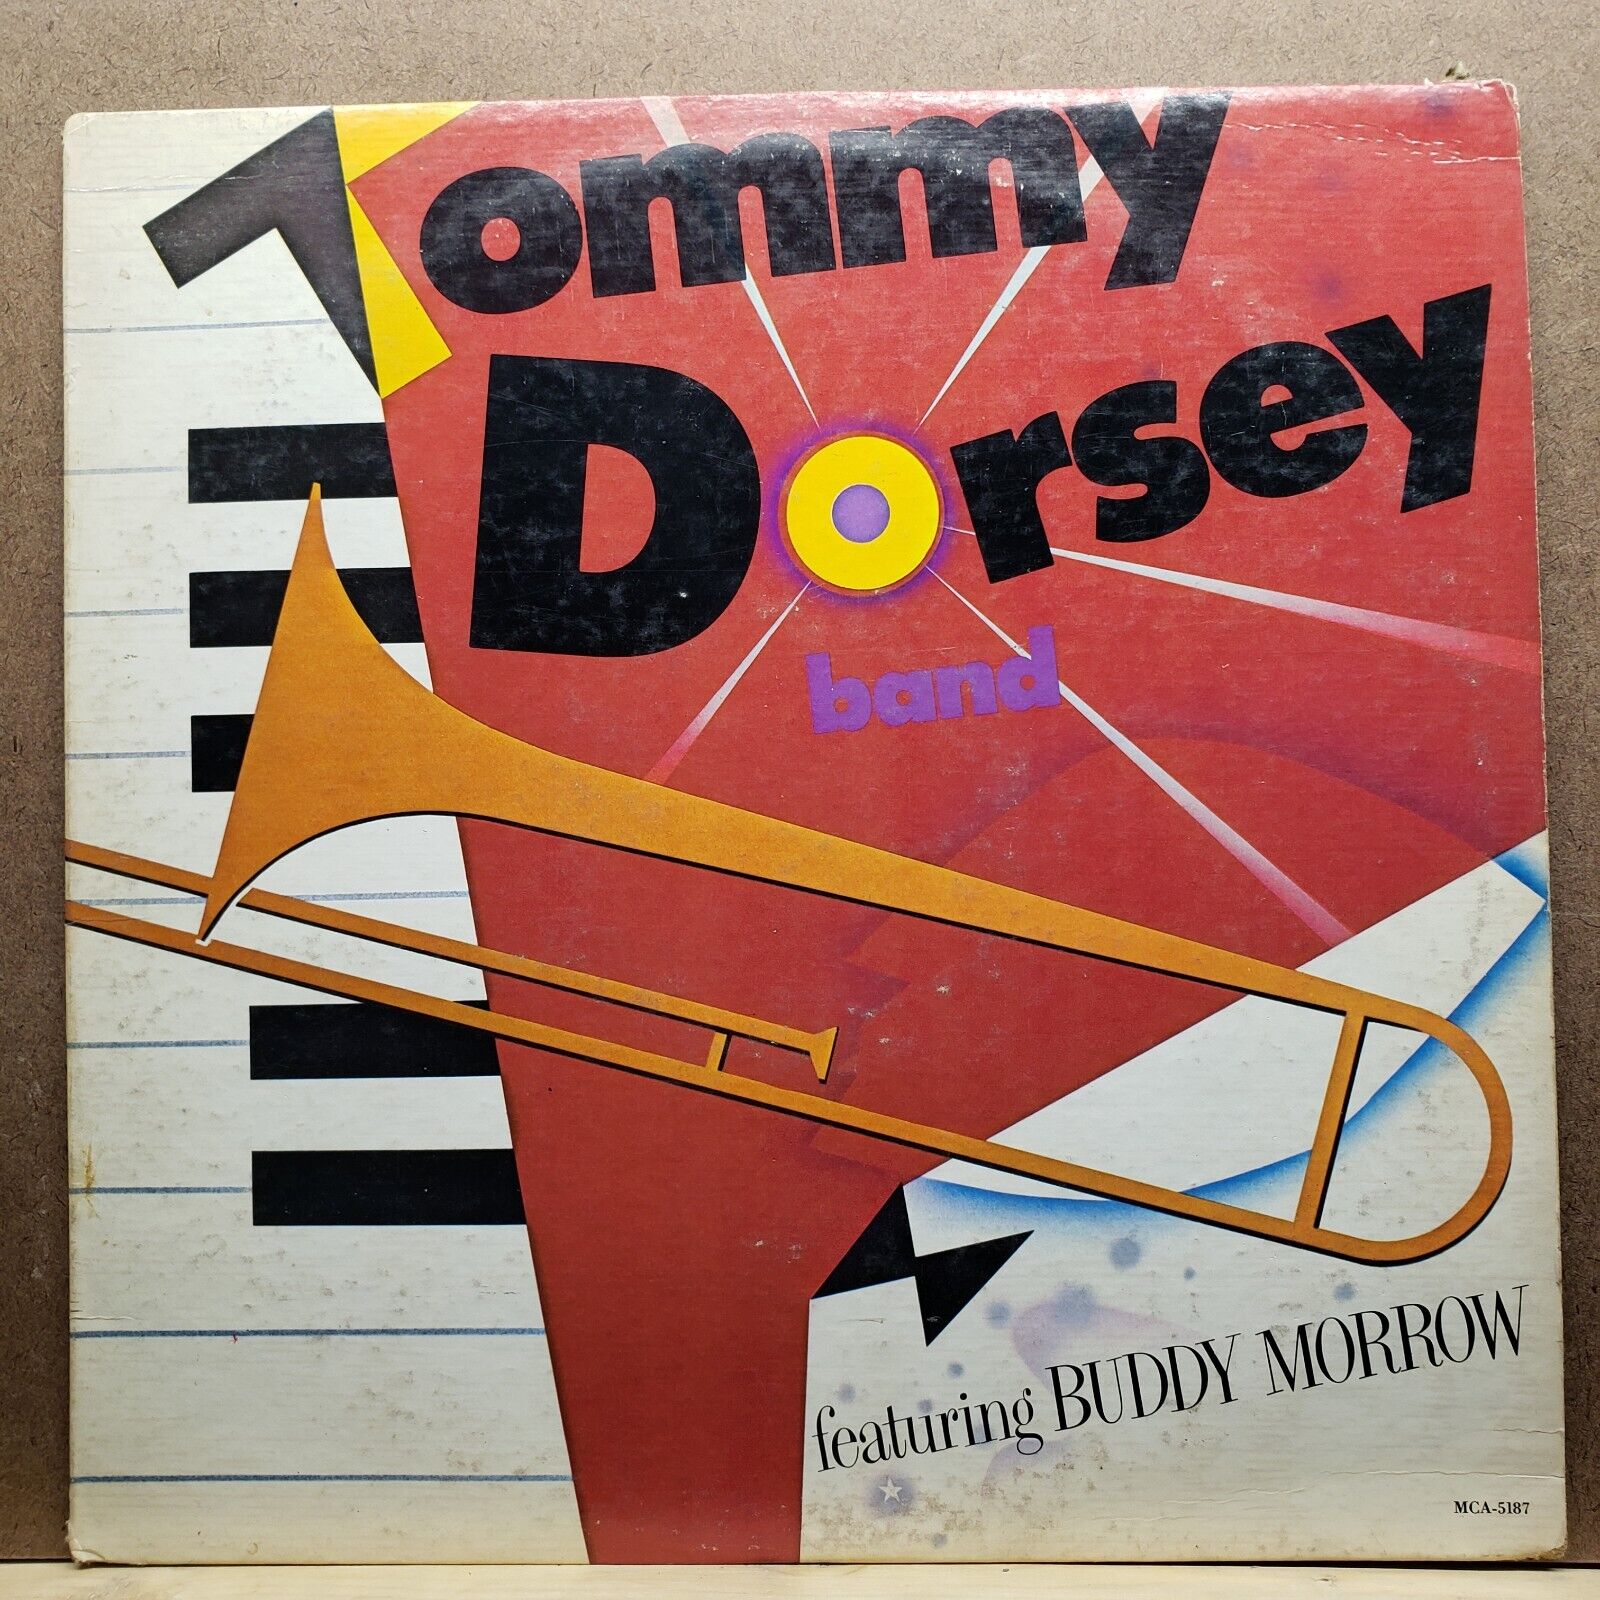 Tommy Dorsey Band - Featuring BUddy Morrow - MCA 5187 - Vinyl Record LP